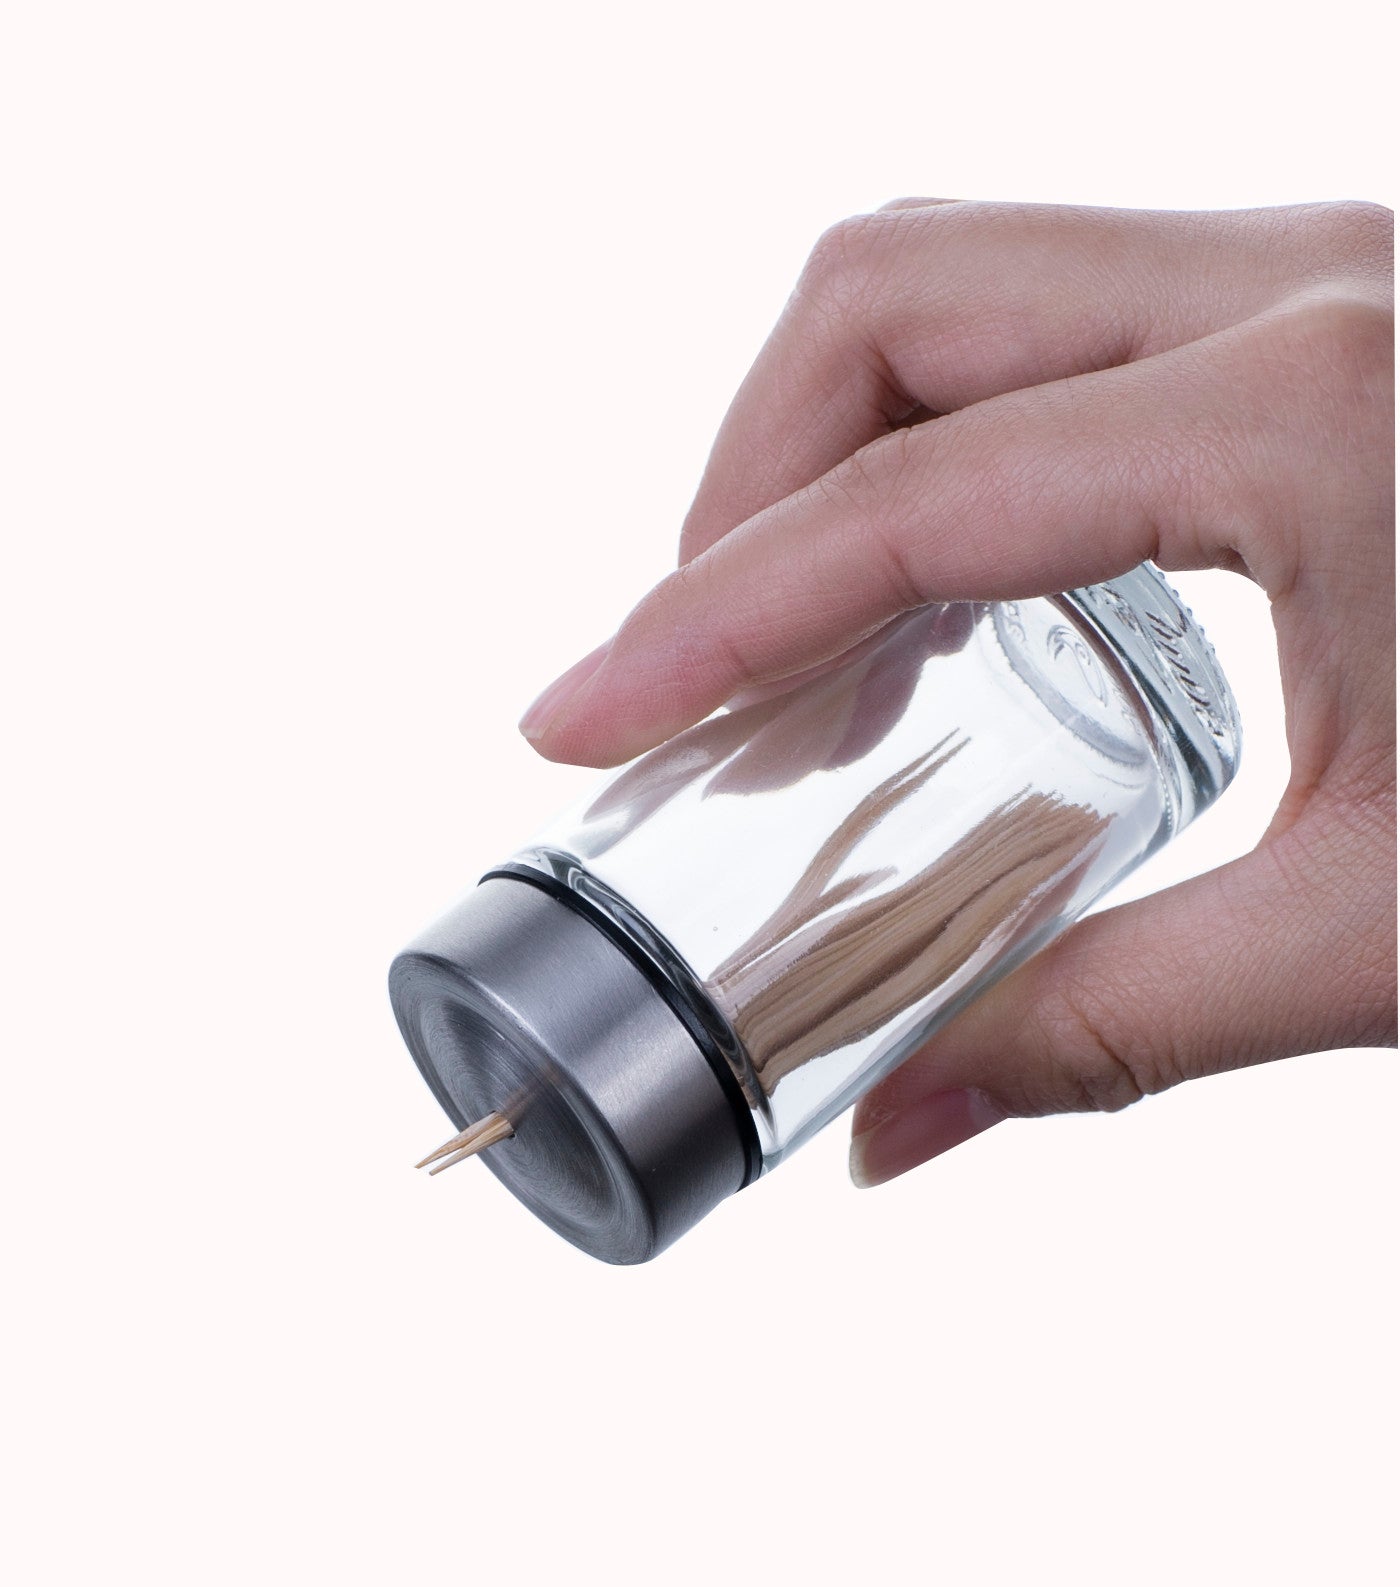 Chefoh Toothpicks Holder -  Stainless-steel Cover Toothpicks in Clear Glass holder | Sturdy Safe Container